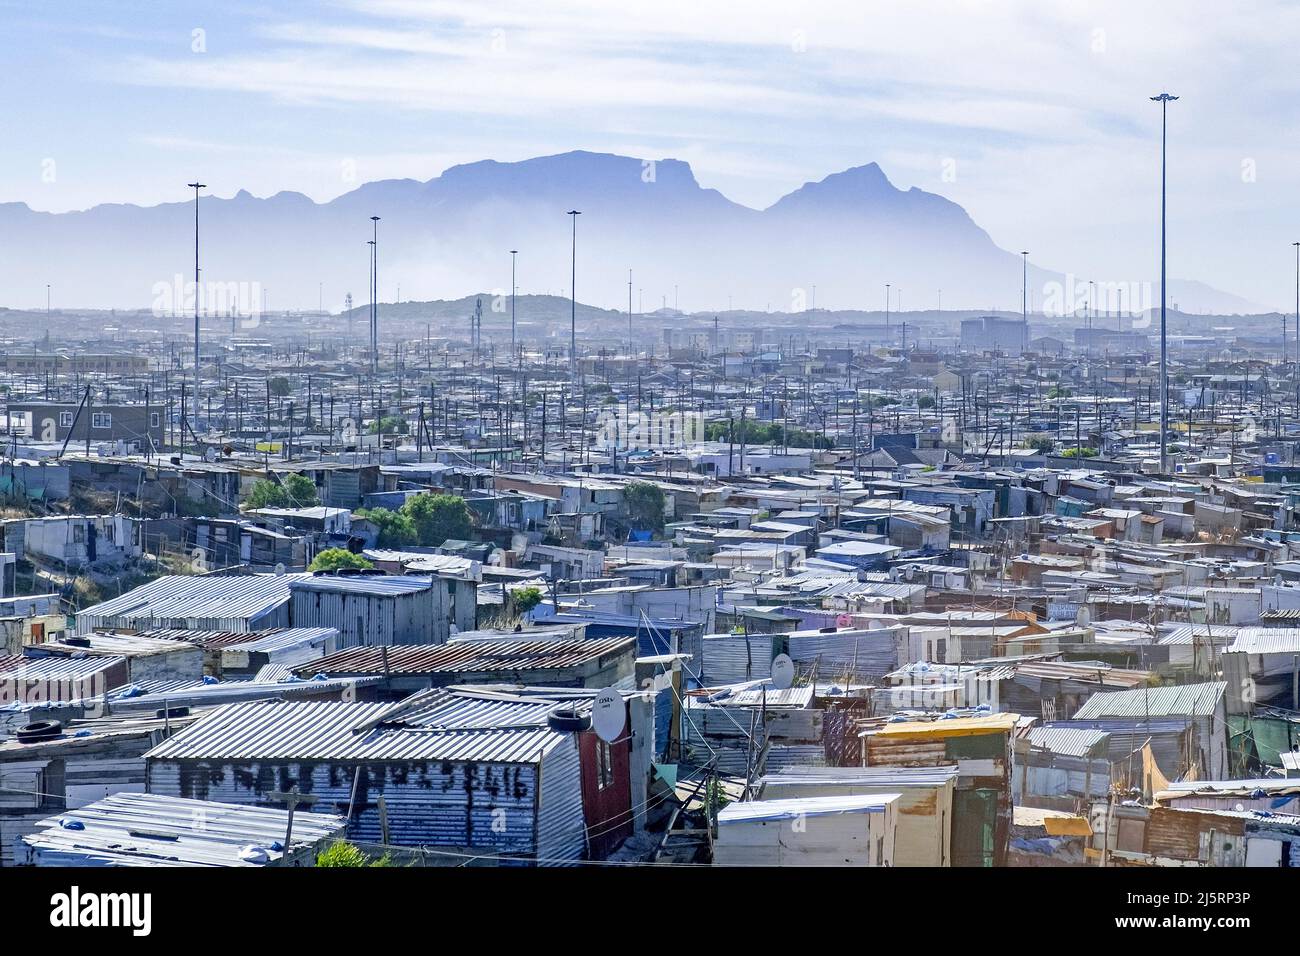 View over shacks at Khayelitsha, township / slum / shanty town on the Cape Flats in the city Cape Town / Kaapstad, Western Cape Province, South Africa Stock Photo